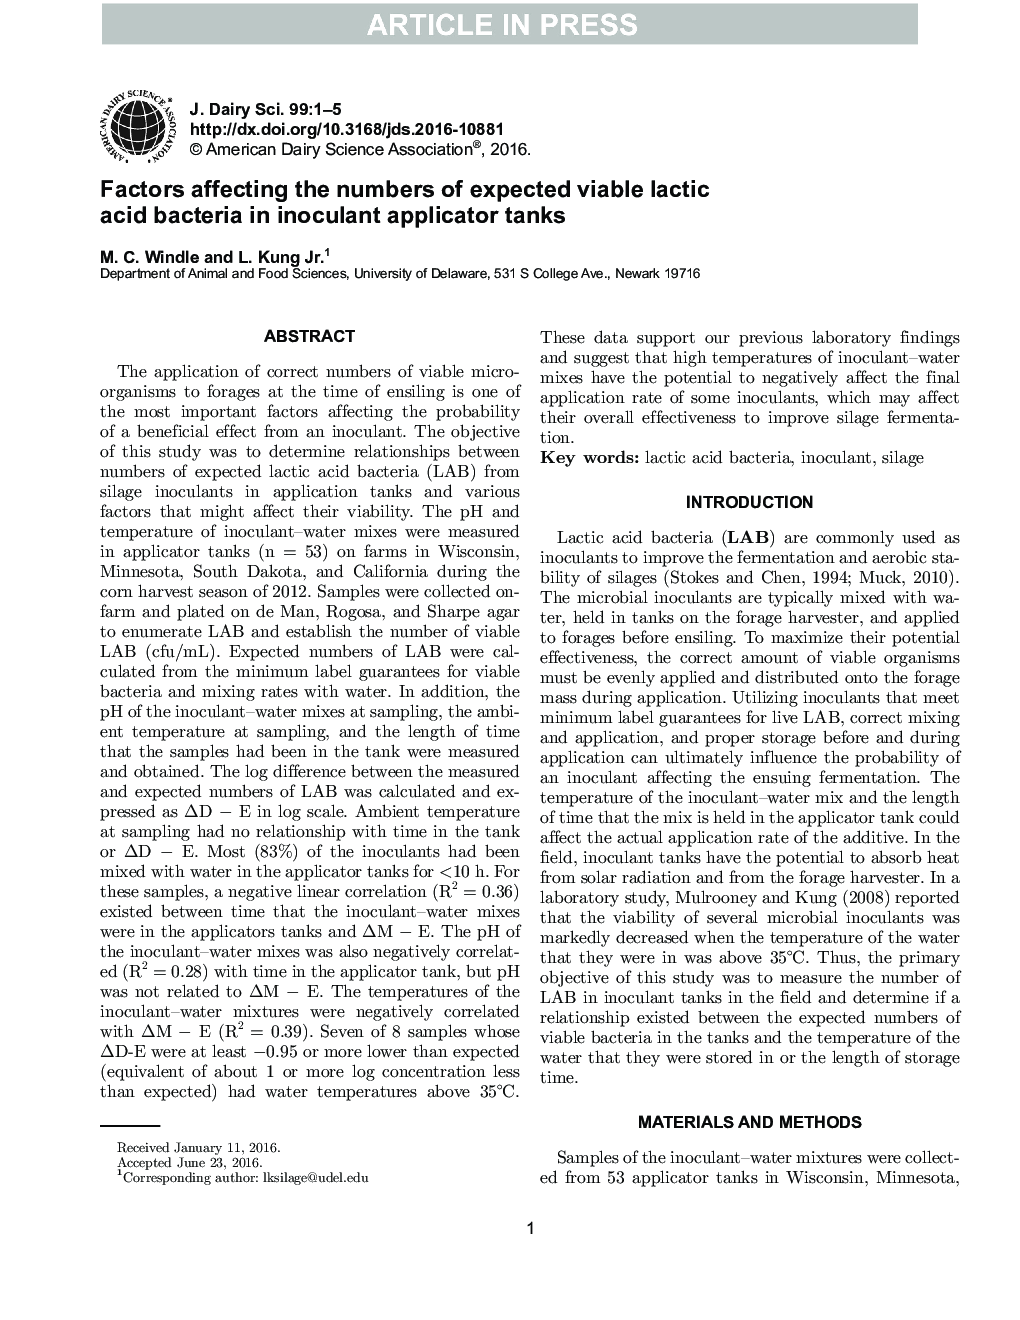 Factors affecting the numbers of expected viable lactic acid bacteria in inoculant applicator tanks